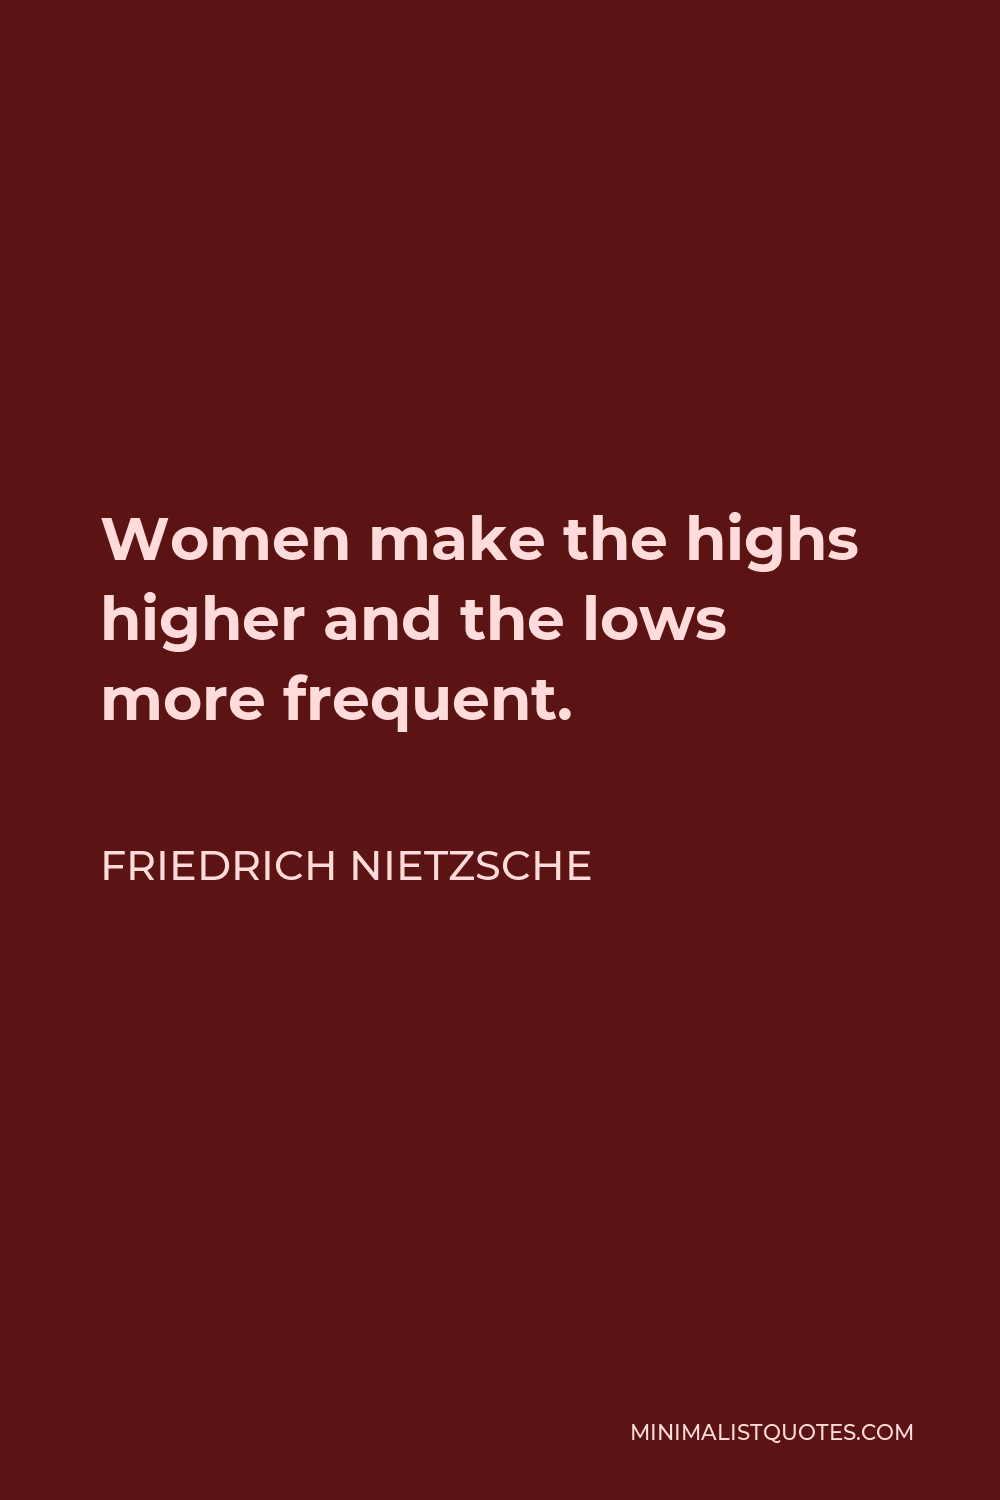 Friedrich Nietzsche Quote - Women make the highs higher and the lows more frequent.